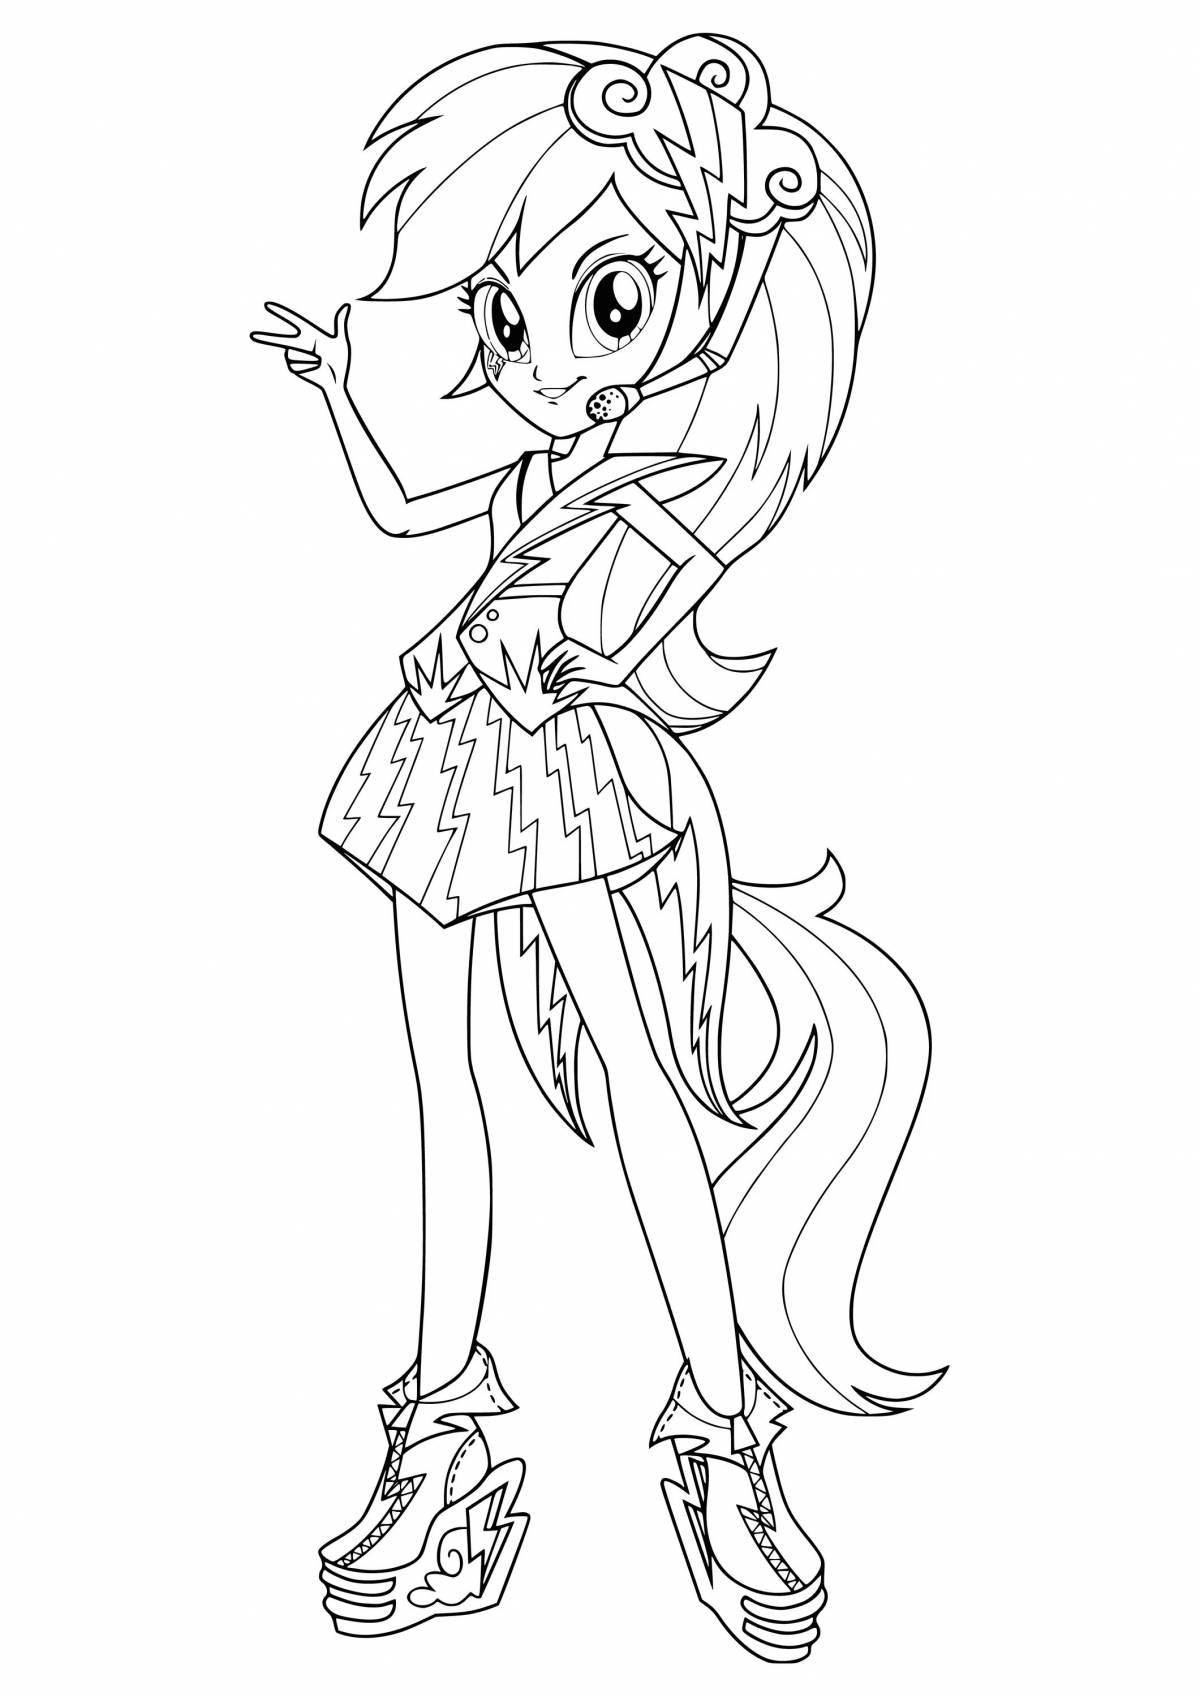 Equestria girls awesome rainbow dash coloring book